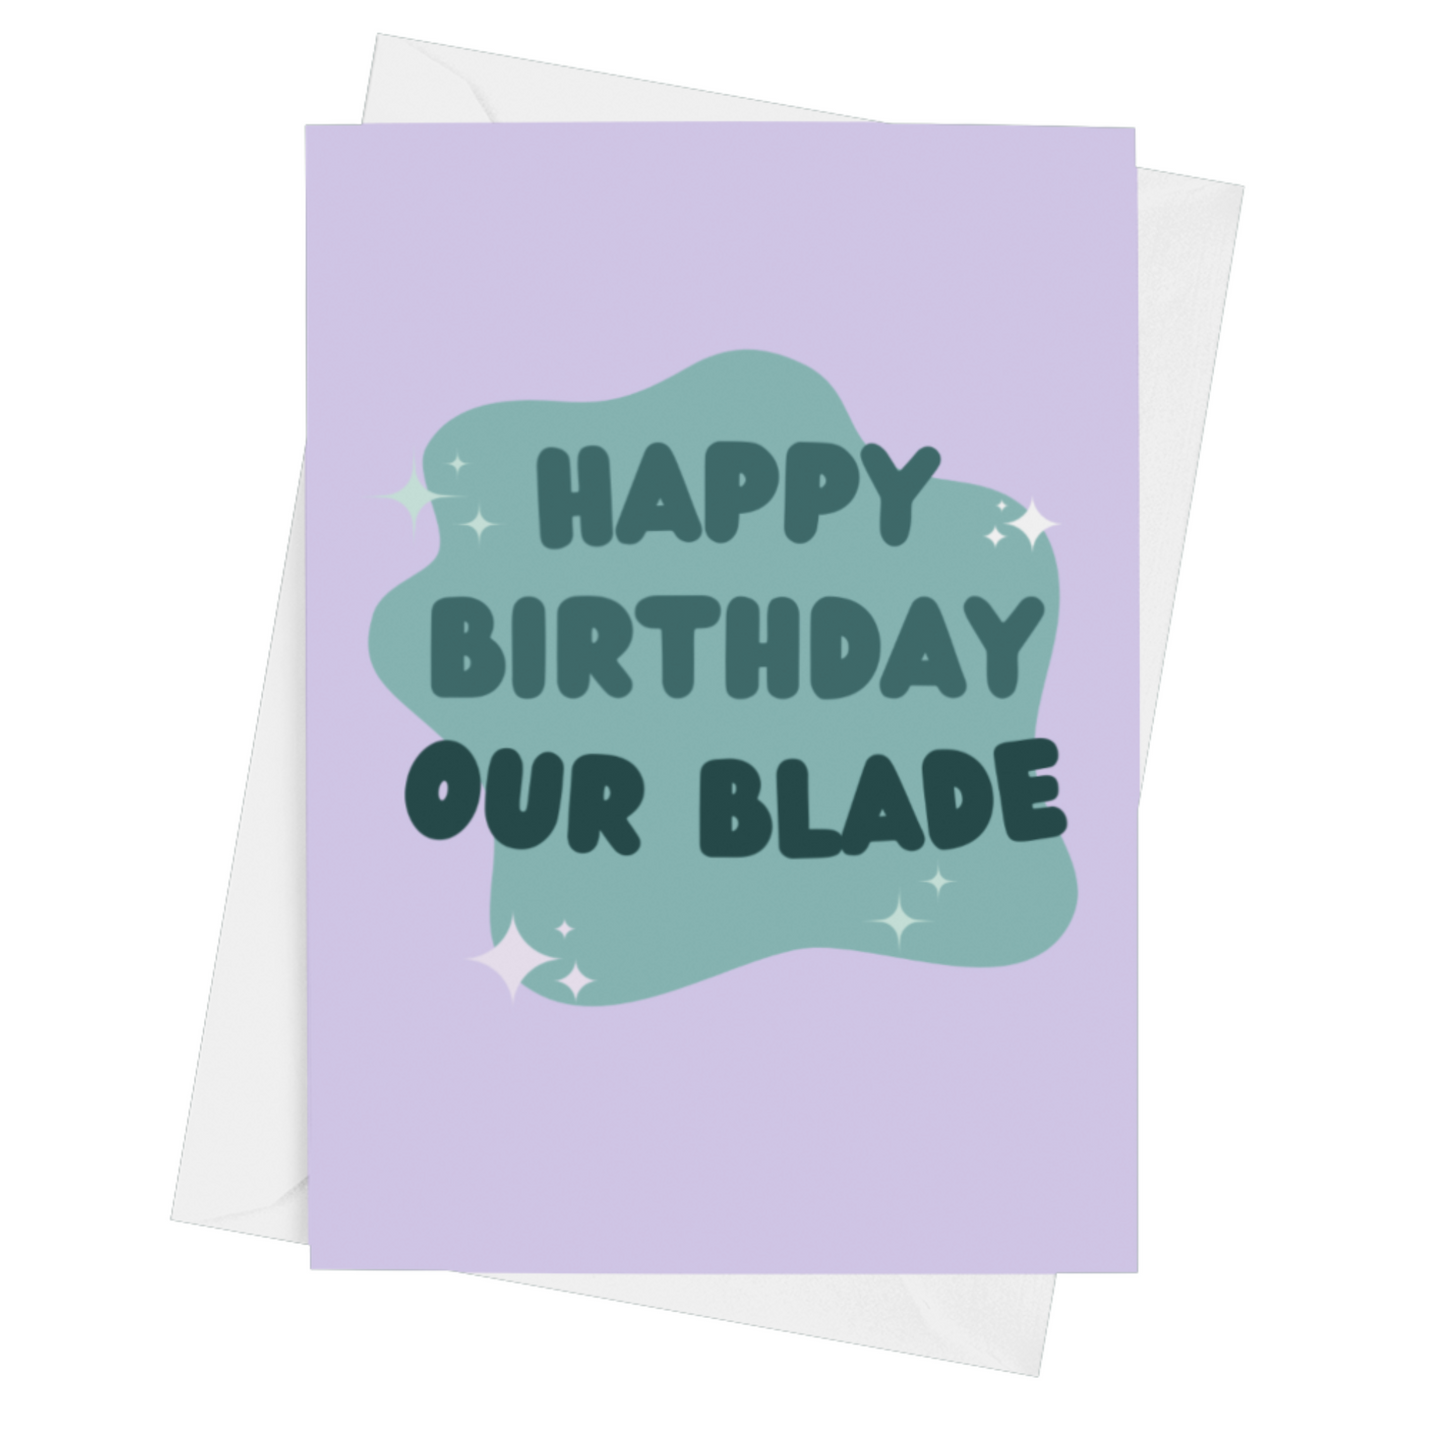 HB OUR BLADE CARD